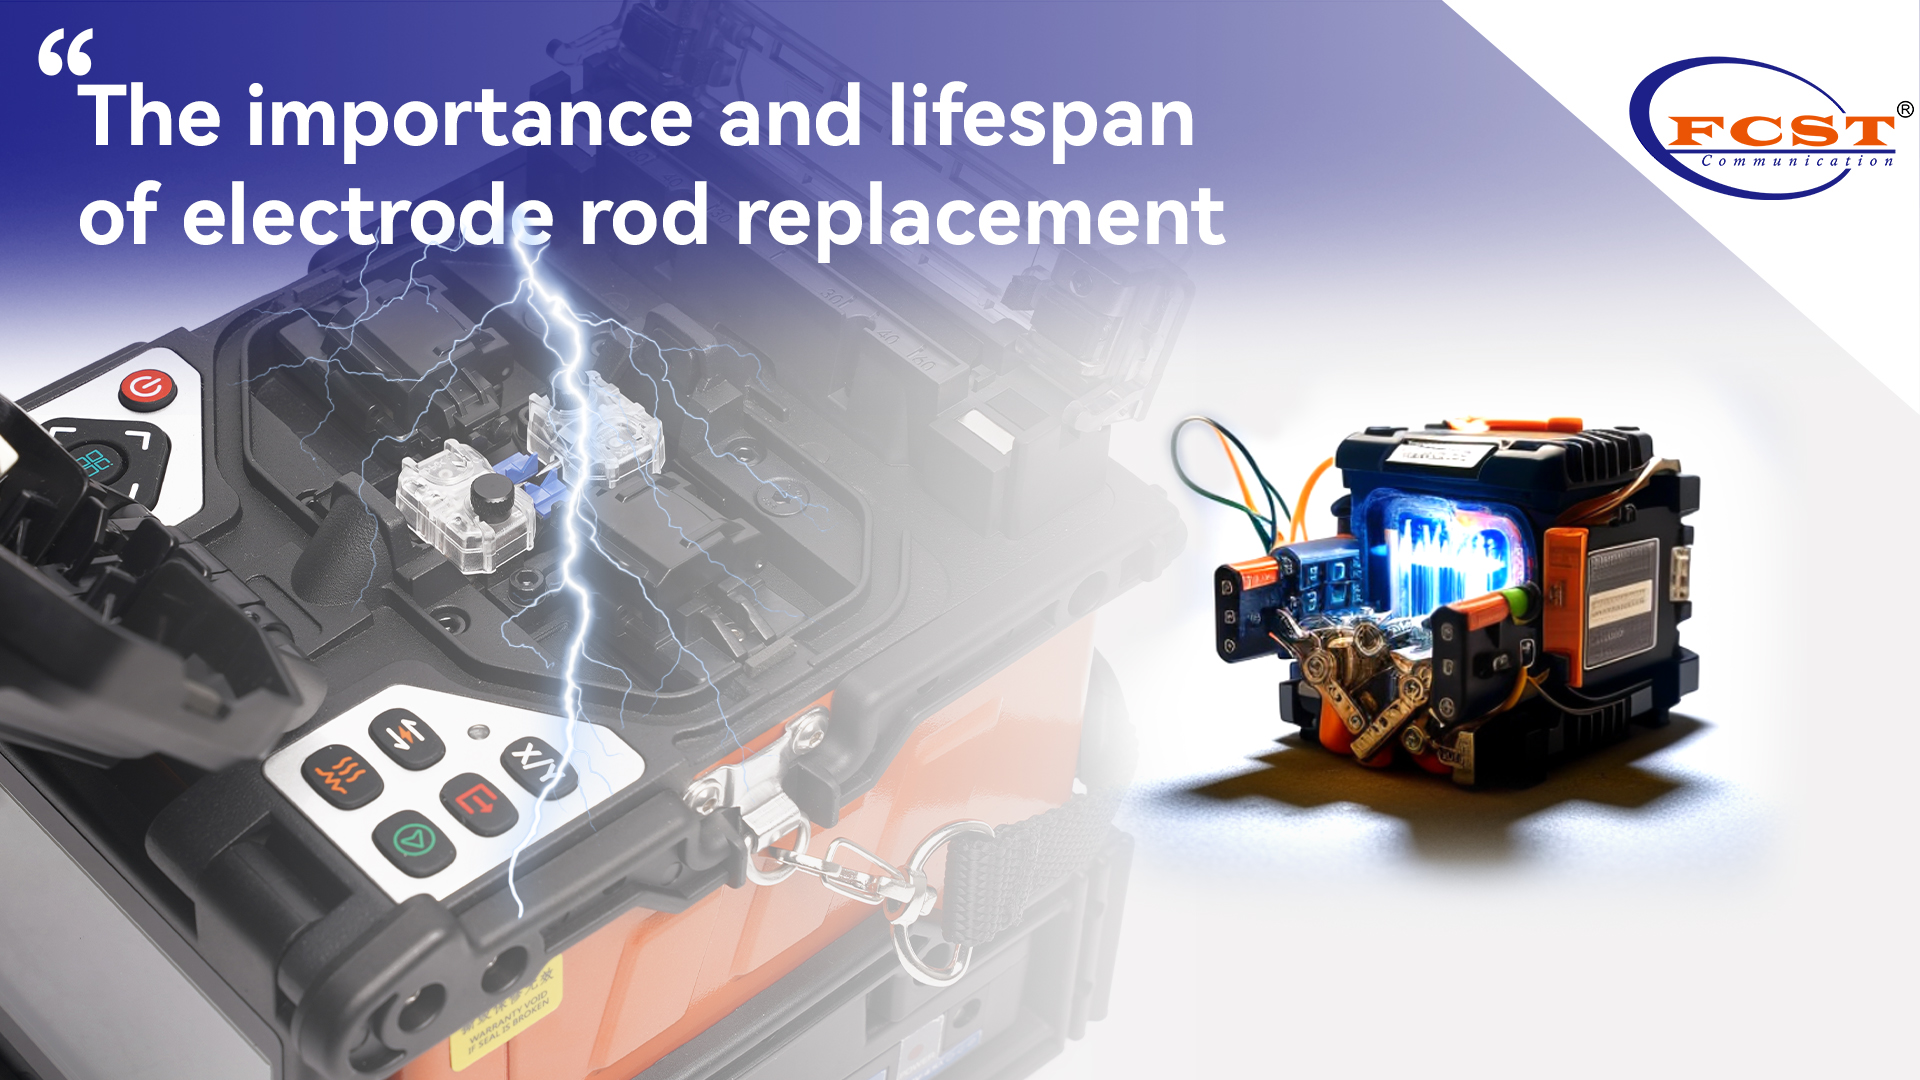 The importance and lifespan of electrode rod replacement